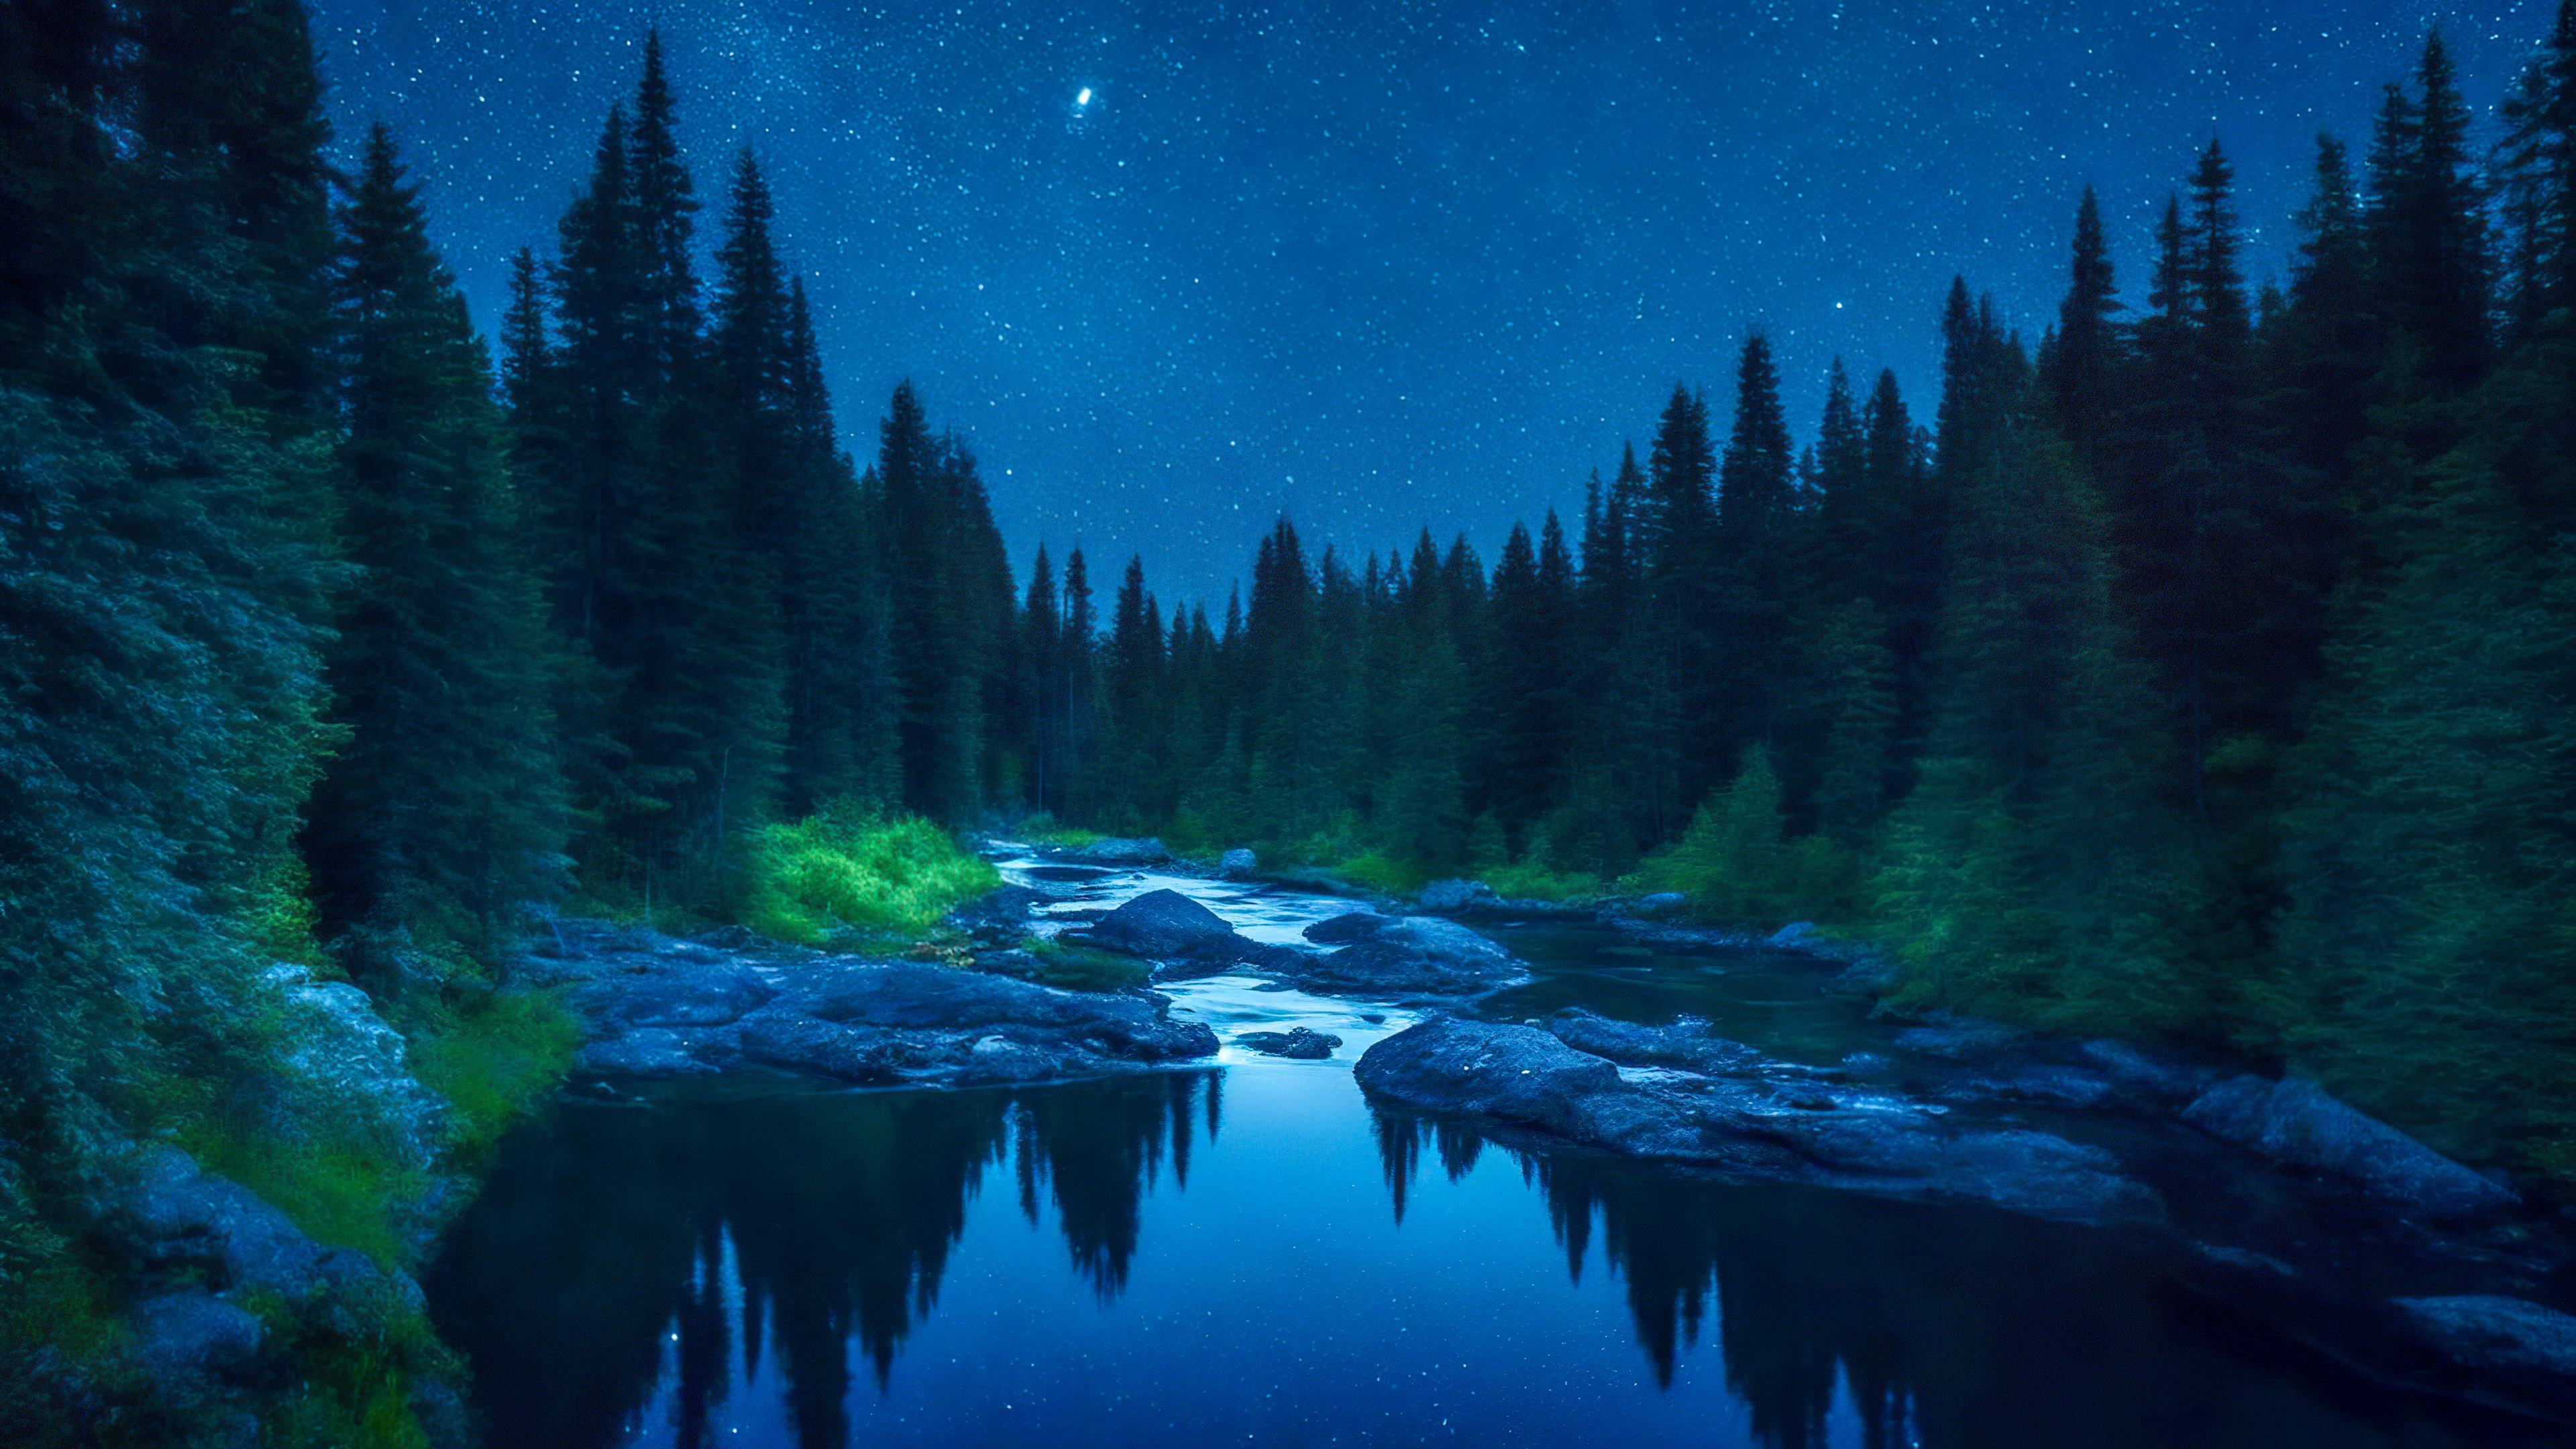 Get mesmerized with our forest landscape wallpaper, showcasing a peaceful river winding through a dense forest, reflecting the sparkling night sky.